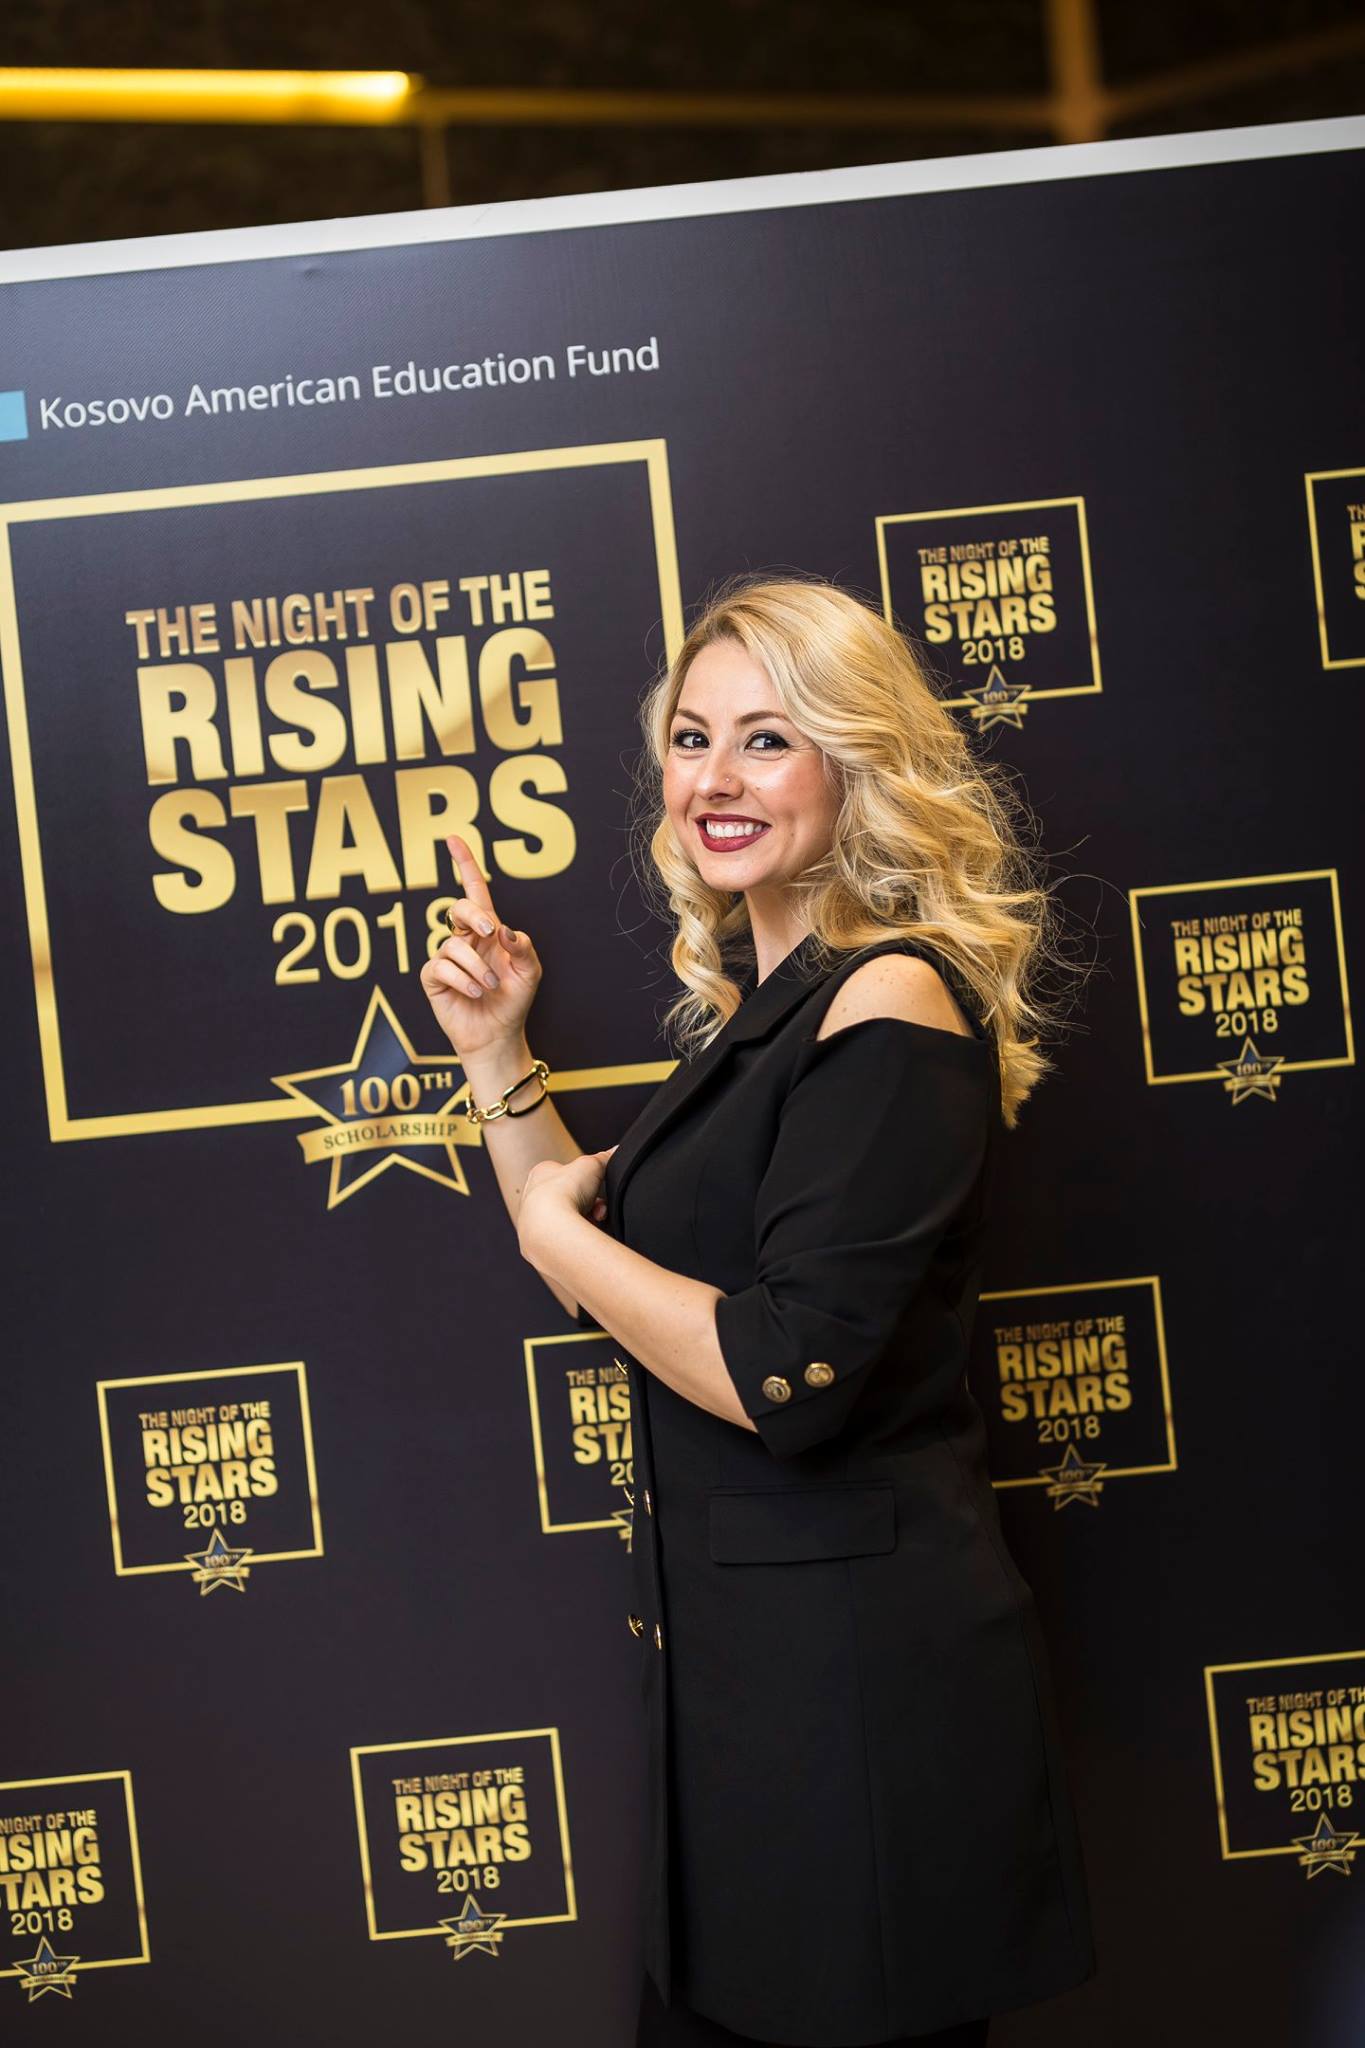 A woman at the KAEF dinner smiles and poses in front of a backdrop that reads "Night of the Rising Stars"